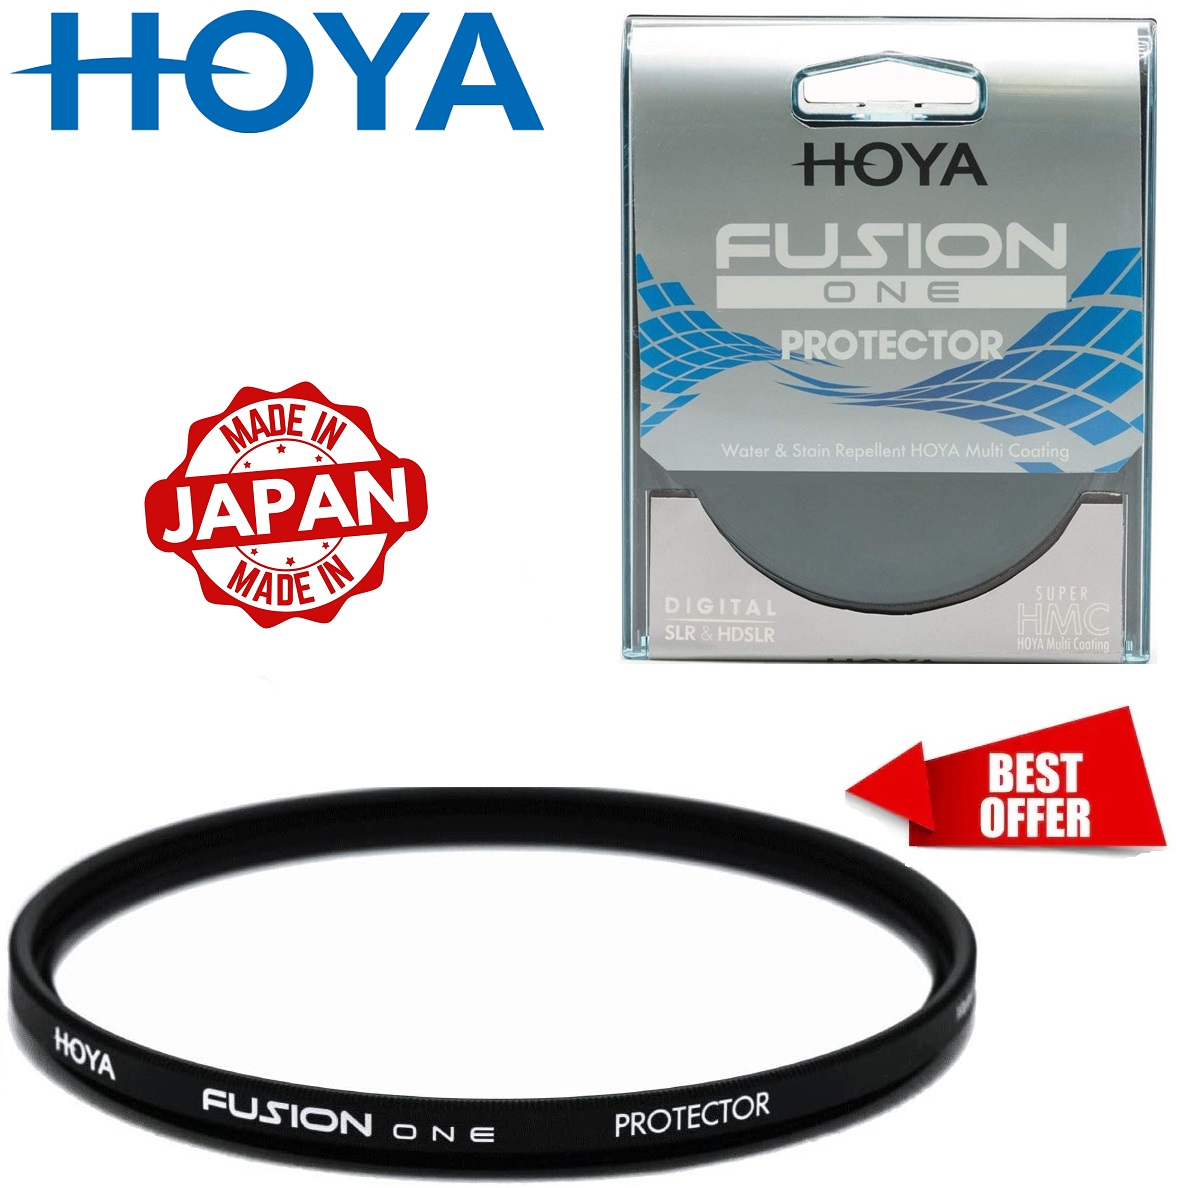 Hoya Fusion ONE Protector Filter 67mm